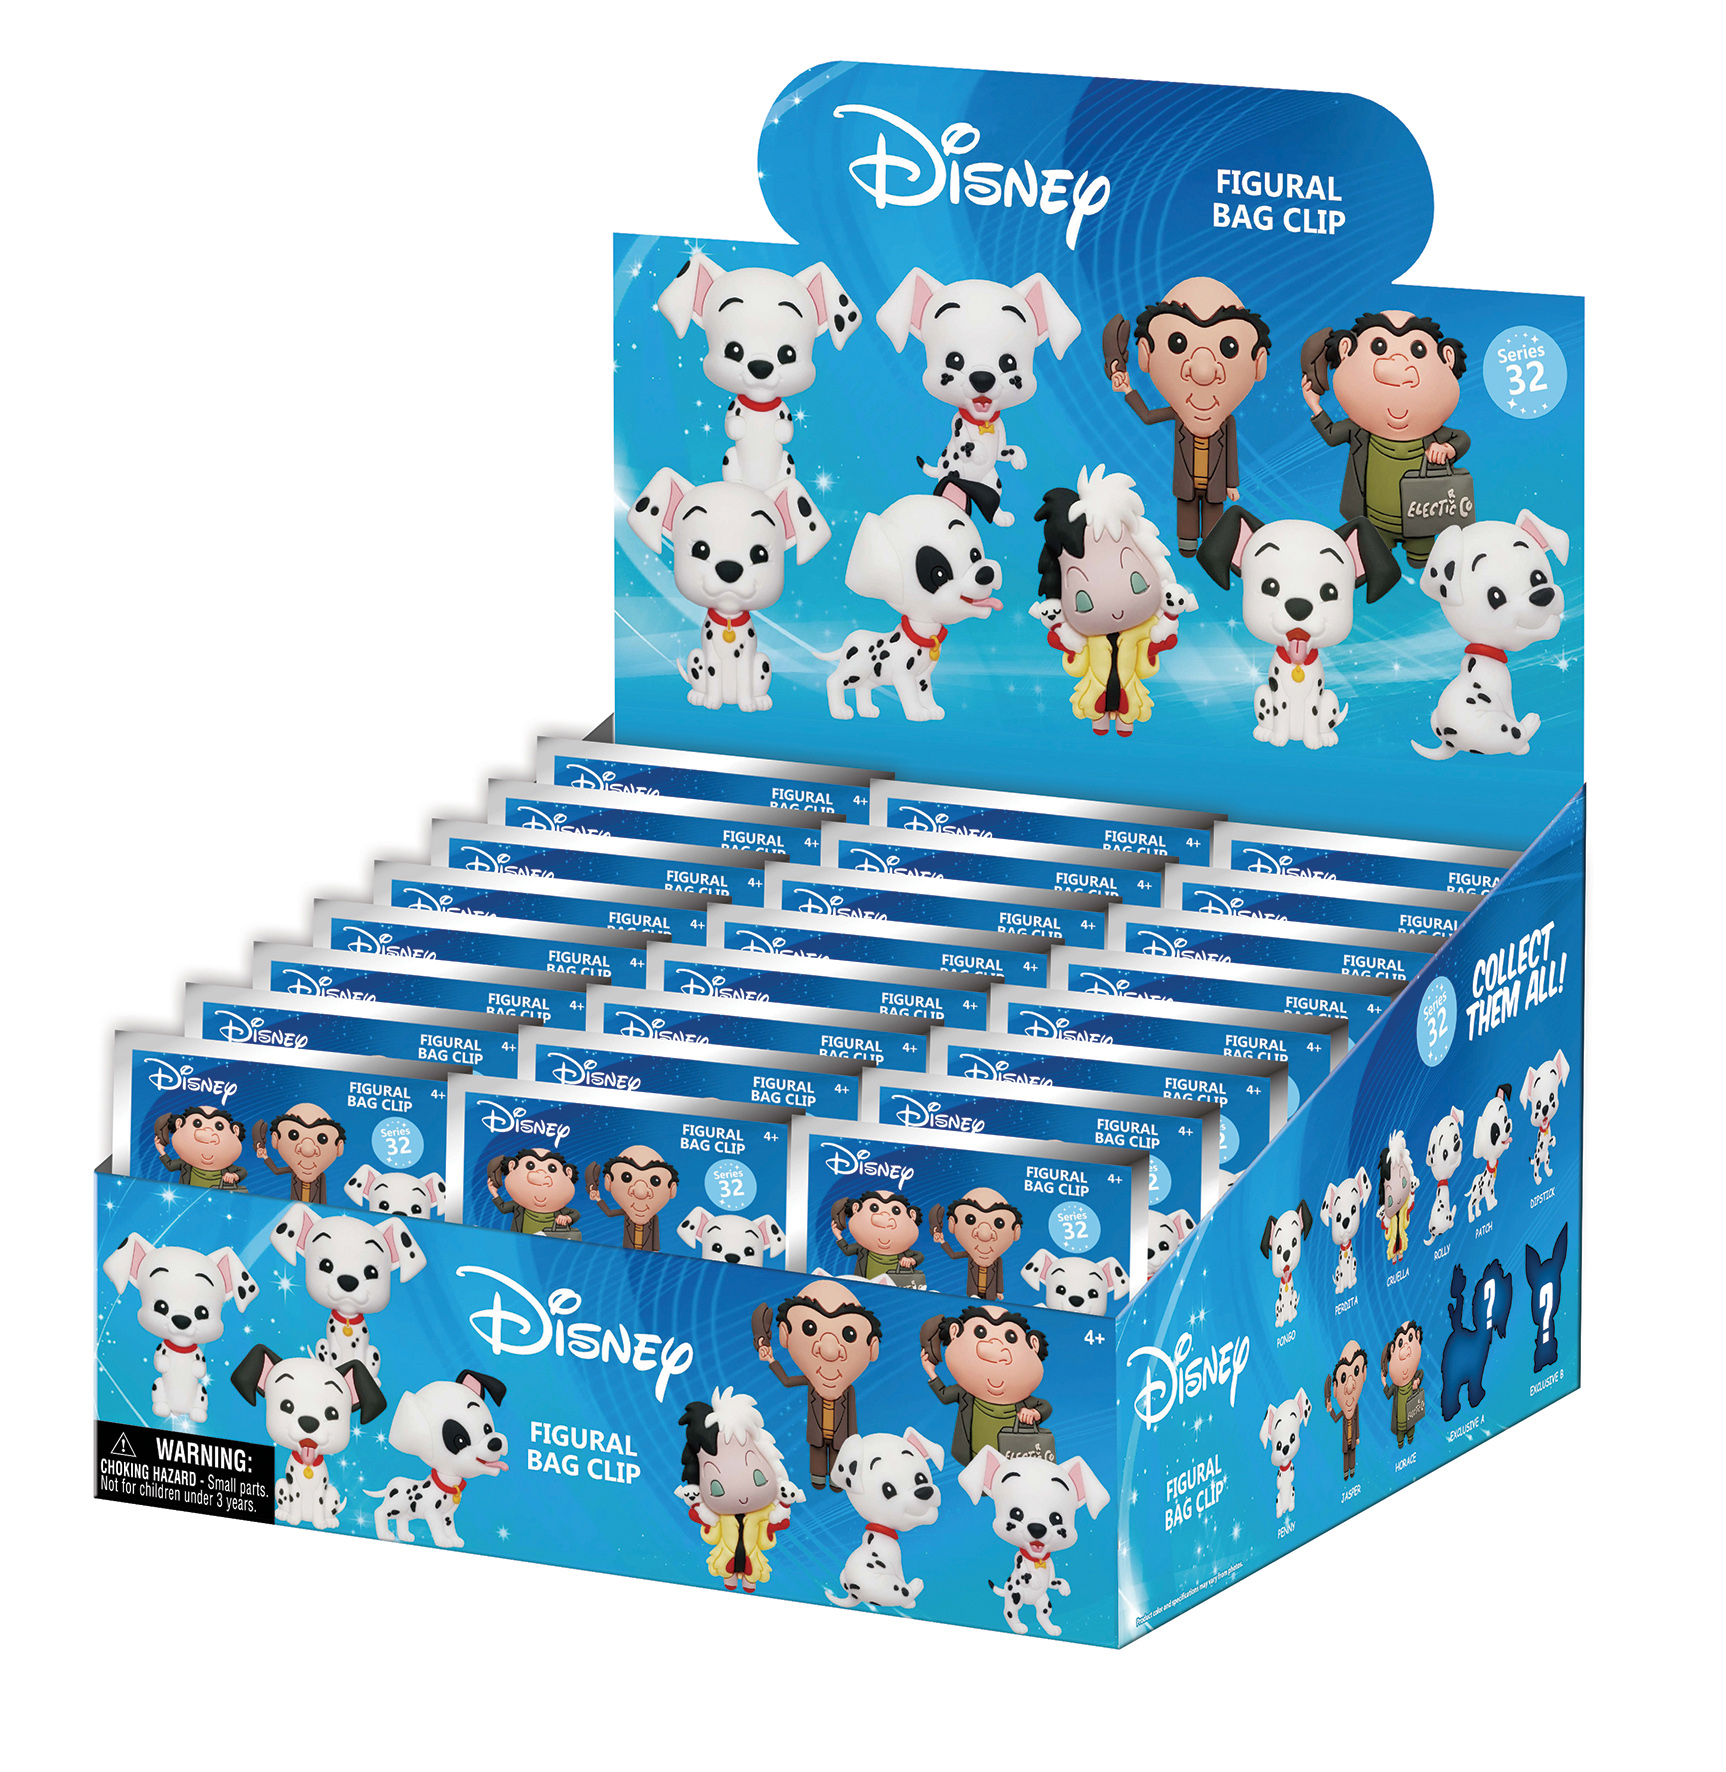 Disney Store 101 Dalmations Key Love Is Blind Mystery Series 